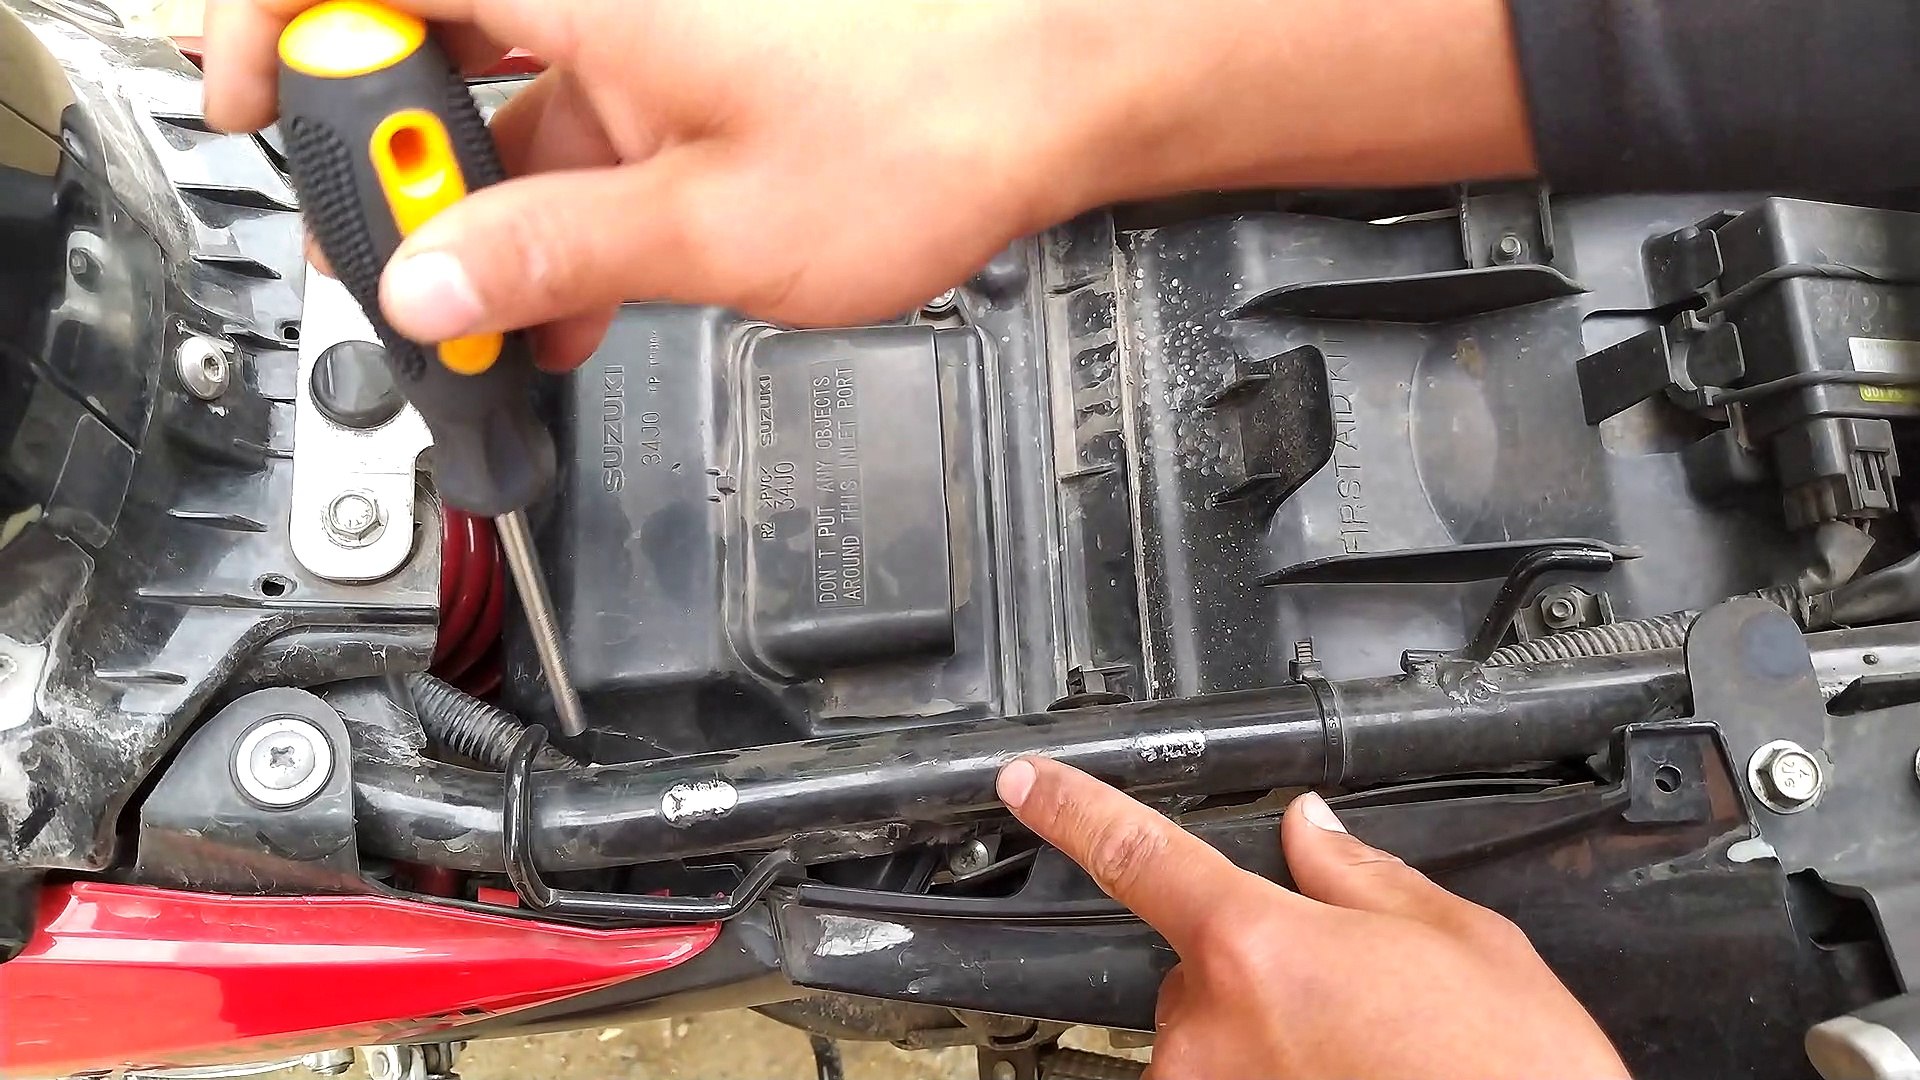 How to change the air filter gixxer 150 - Vídeo Dailymotion